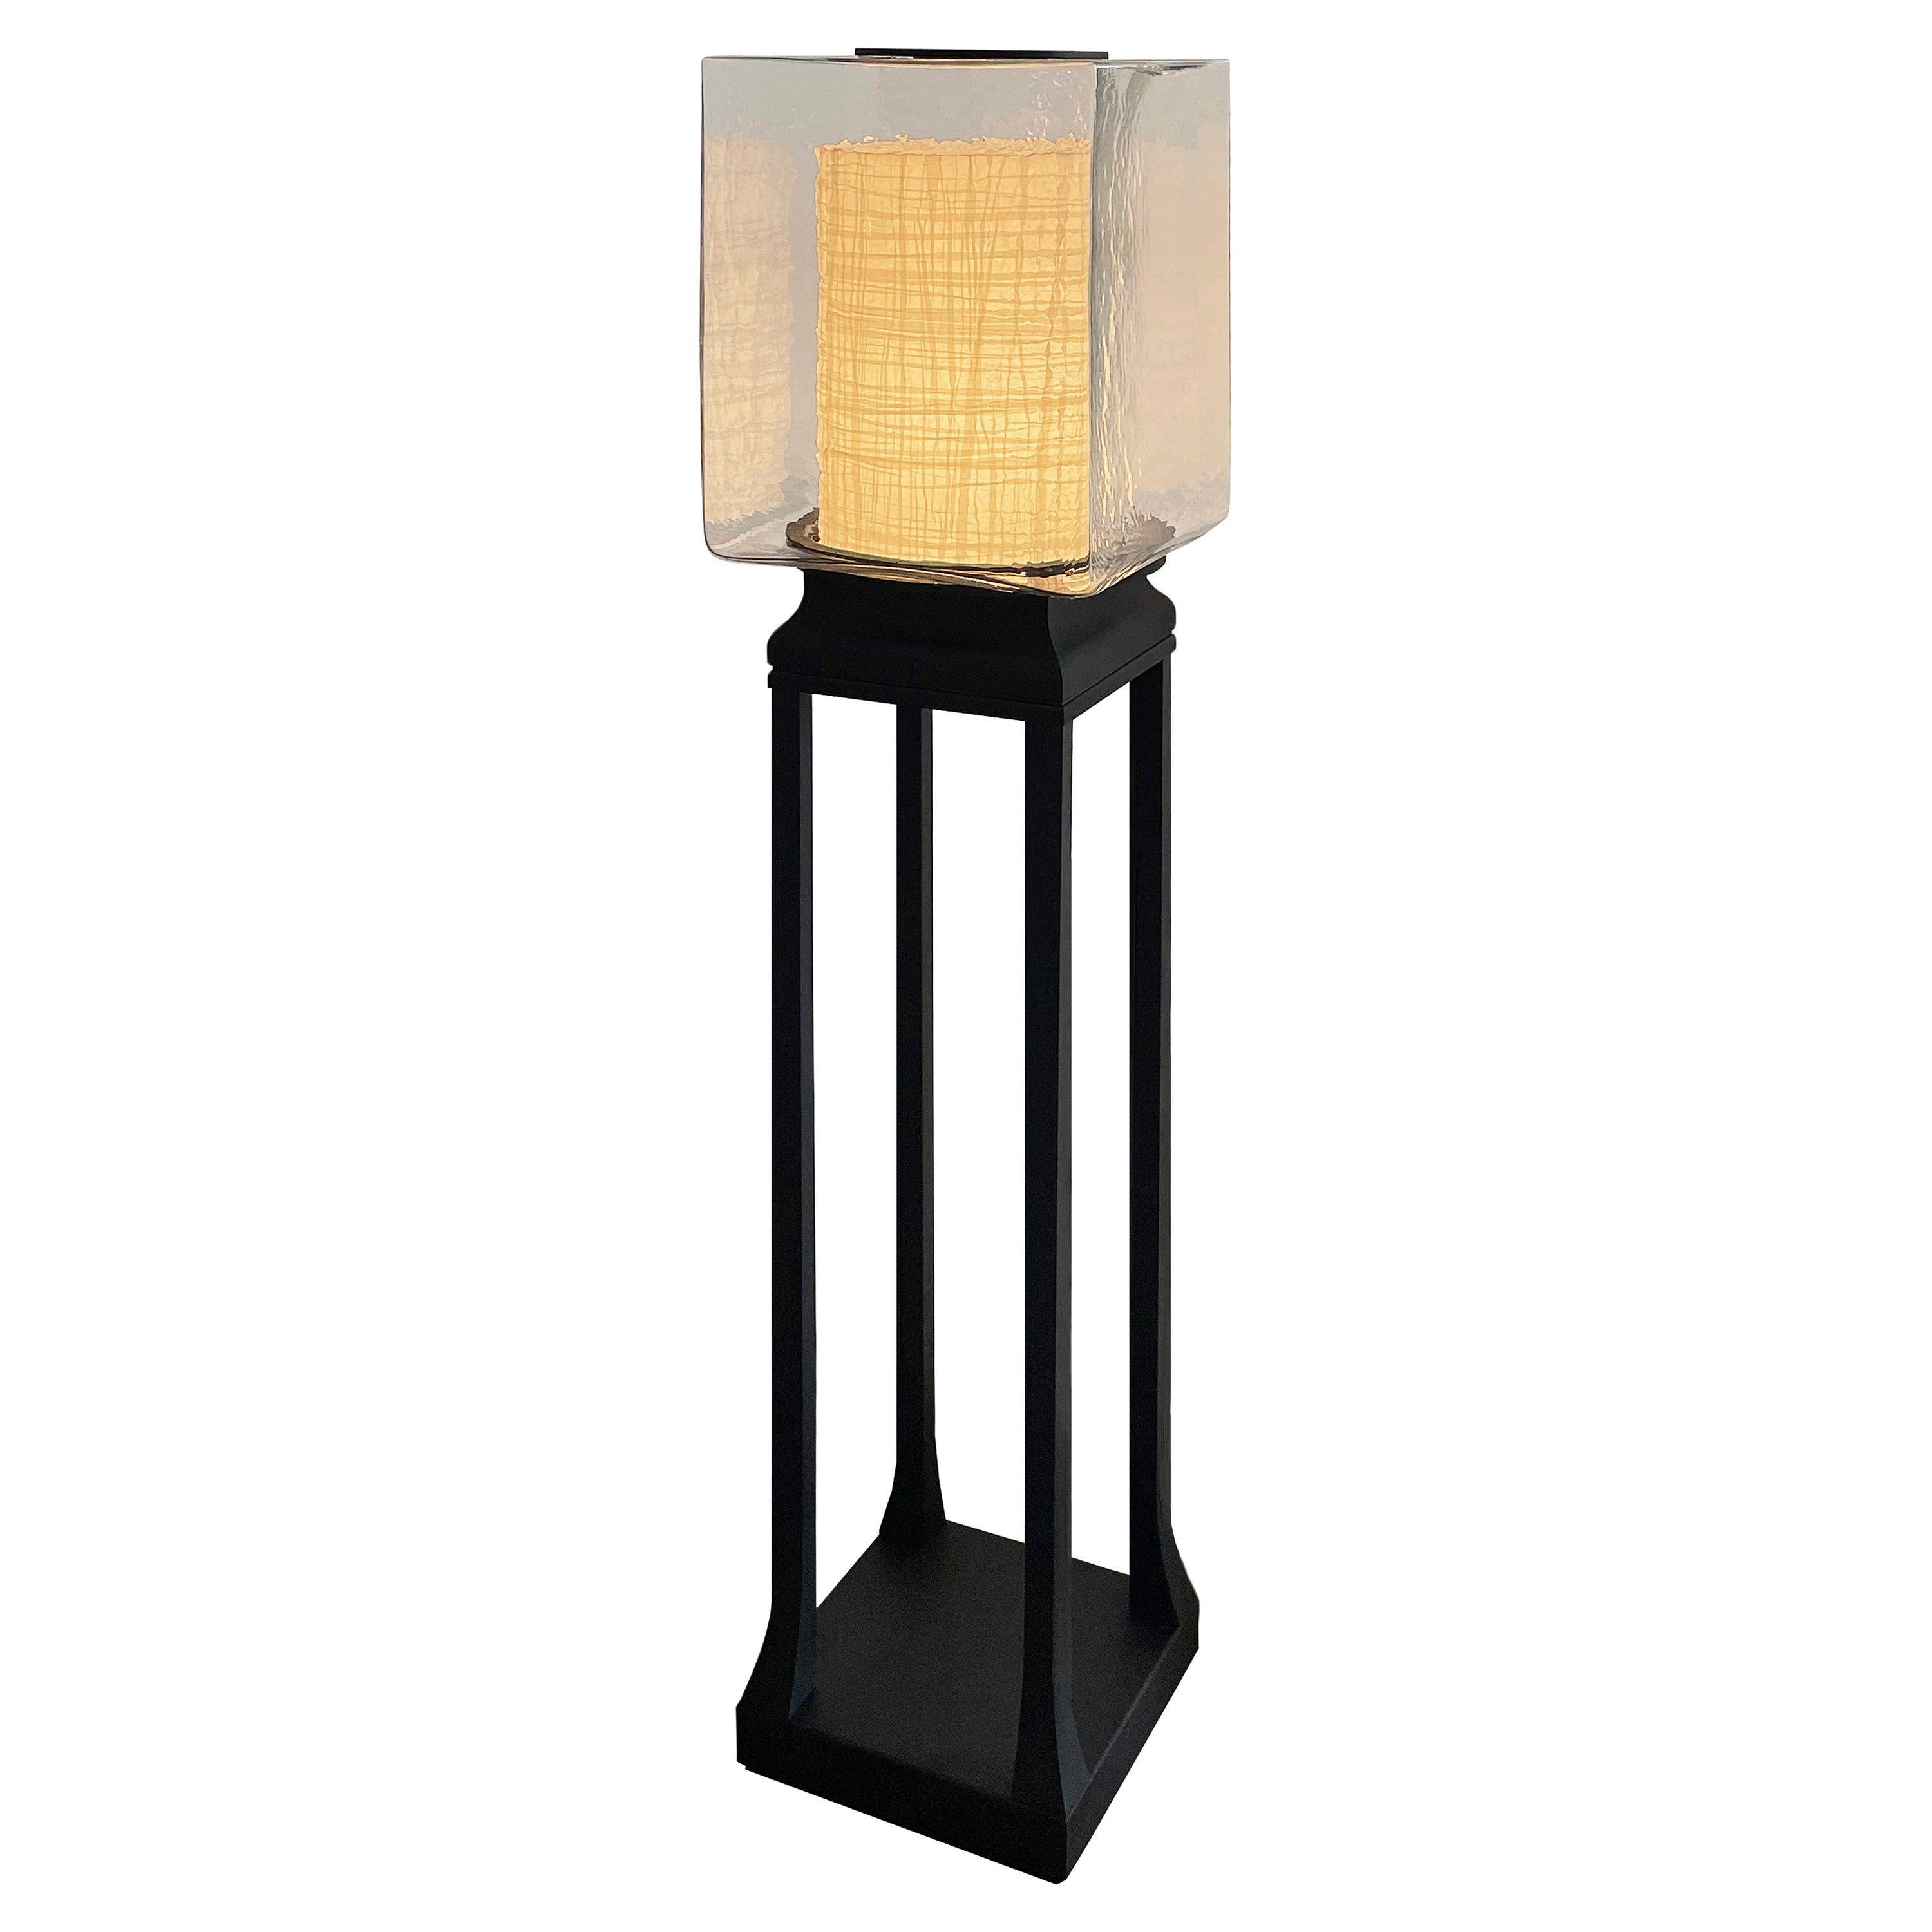 For Laura only - Shoji Floor Lamp with Custom Height 91.5cm 36inches